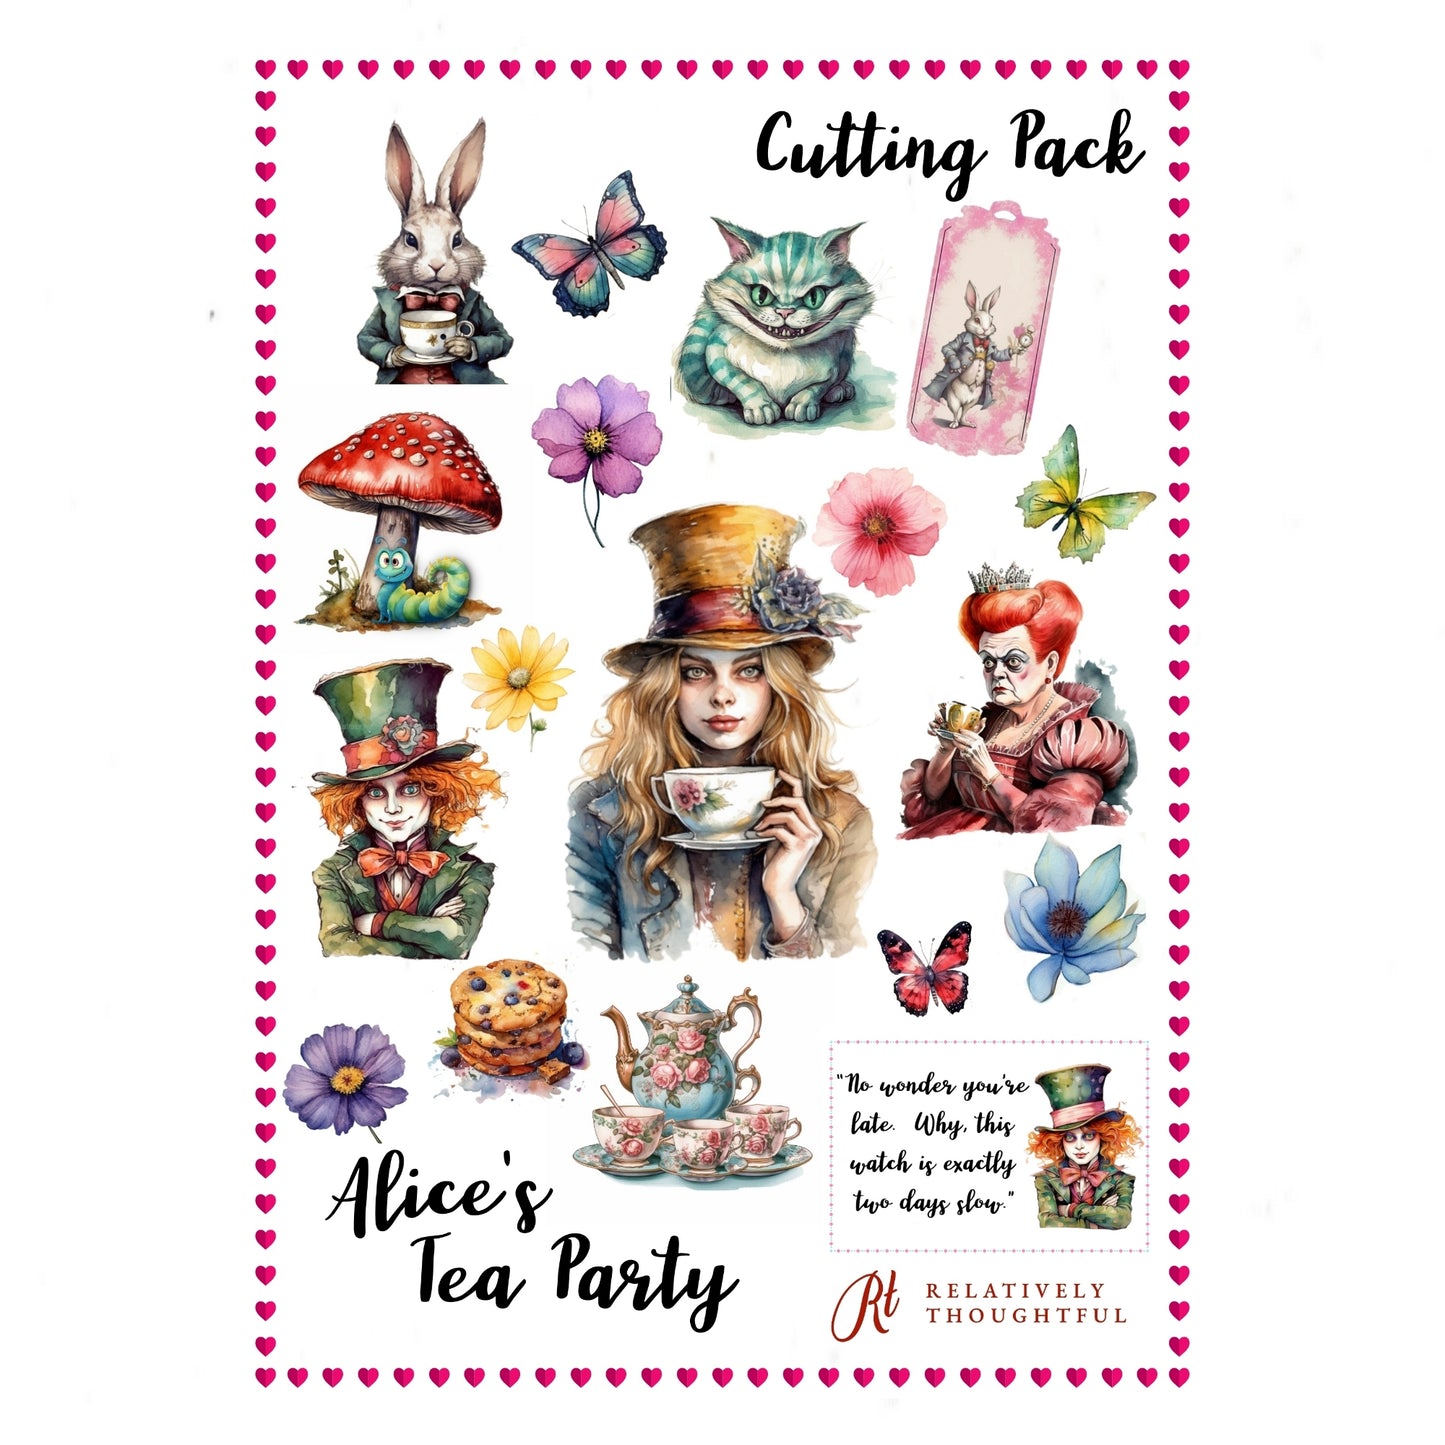 Alice's Tea Party - A4 Cutting Pages